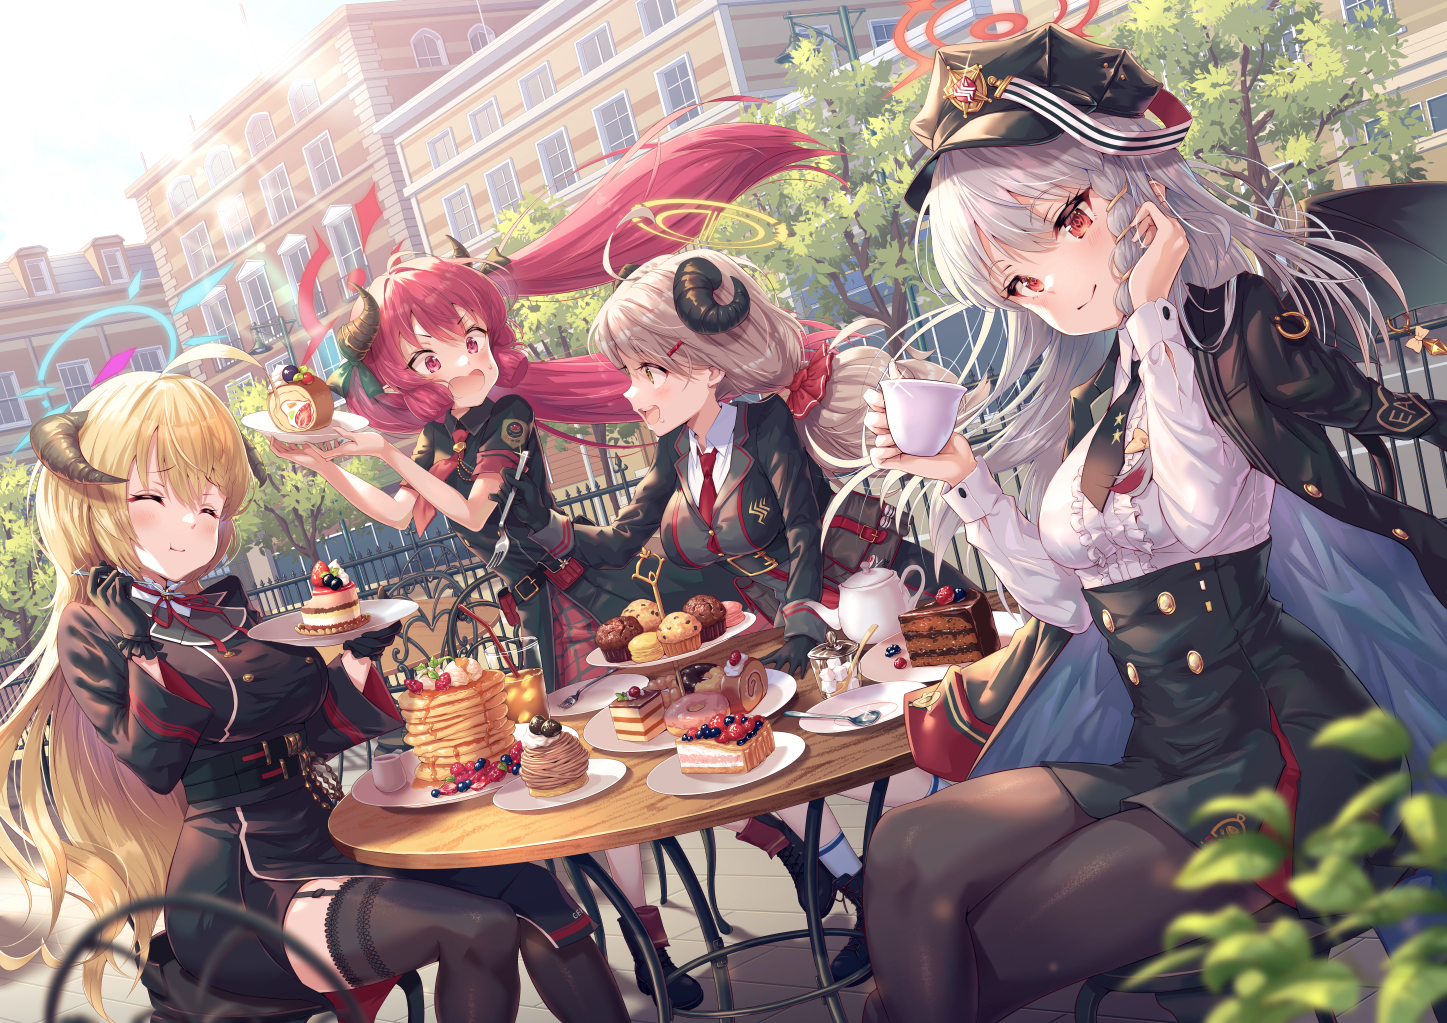 Anime 1447x1023 anime anime girls Blue Archive women quartet group of women food anime girls eating eating cake tea military uniform legs crossed pantyhose stockings Military Hat building trees horns pastries sweets